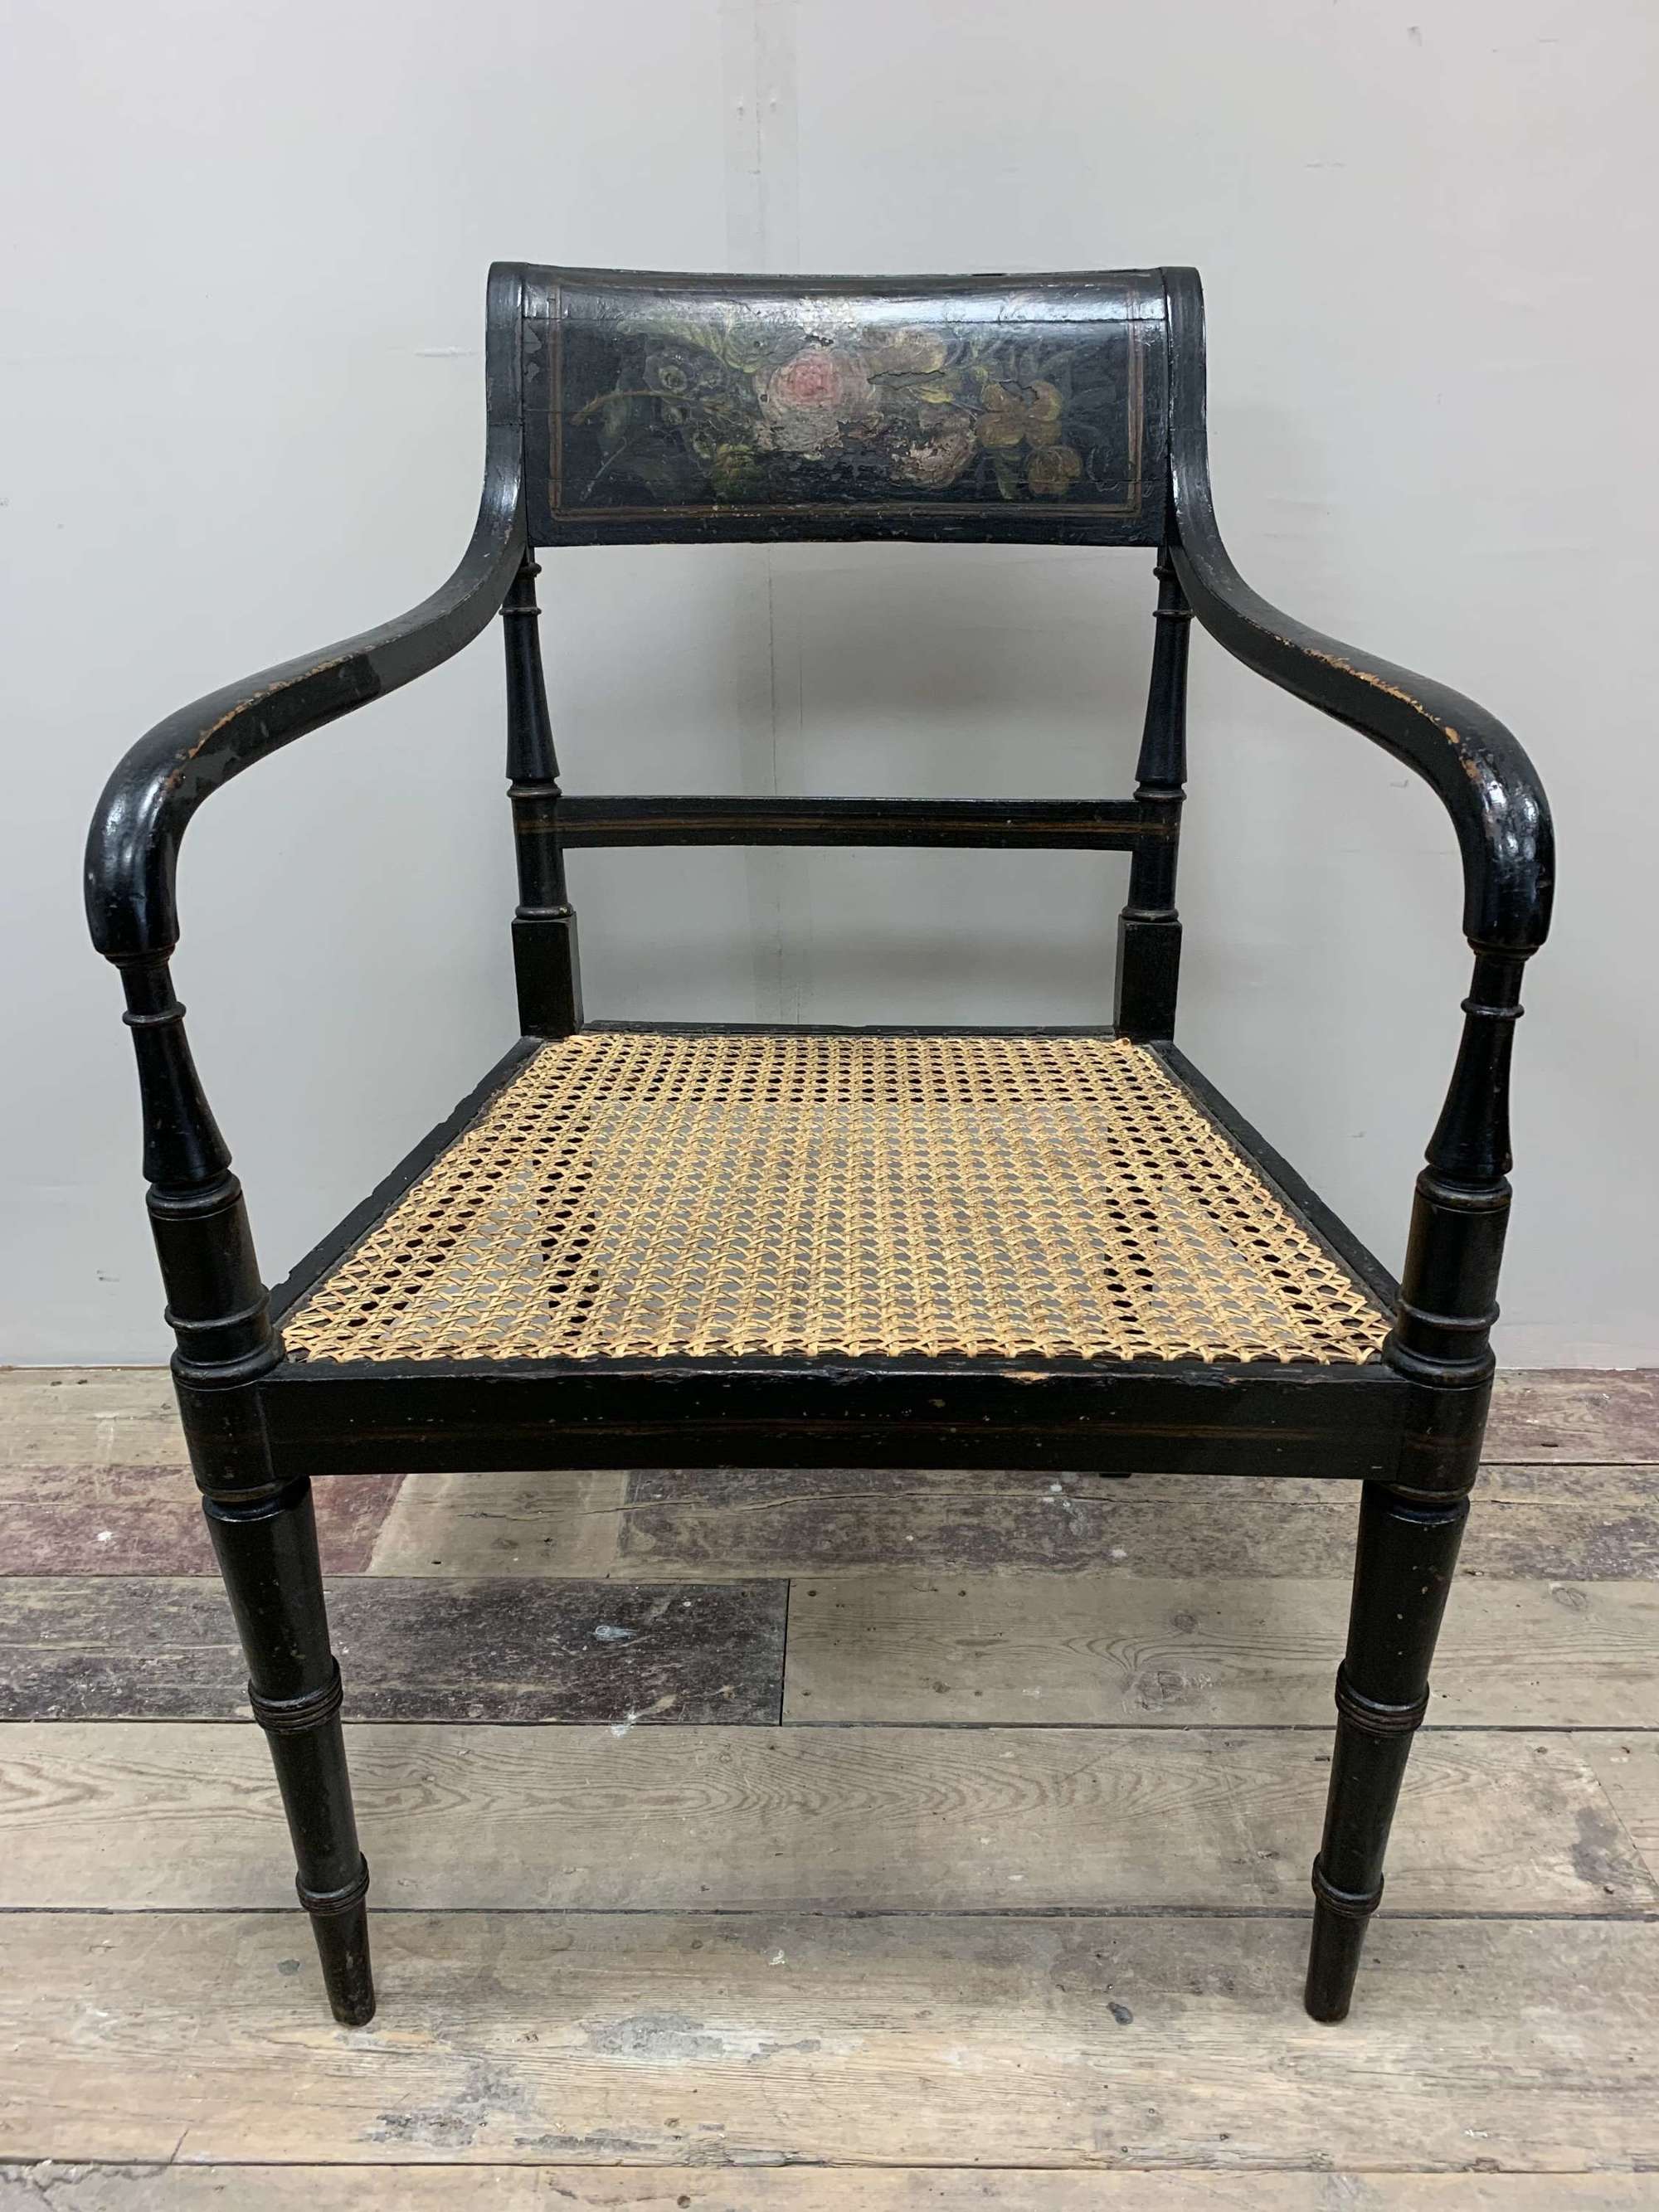 C19th Century painted chair with flower decoration